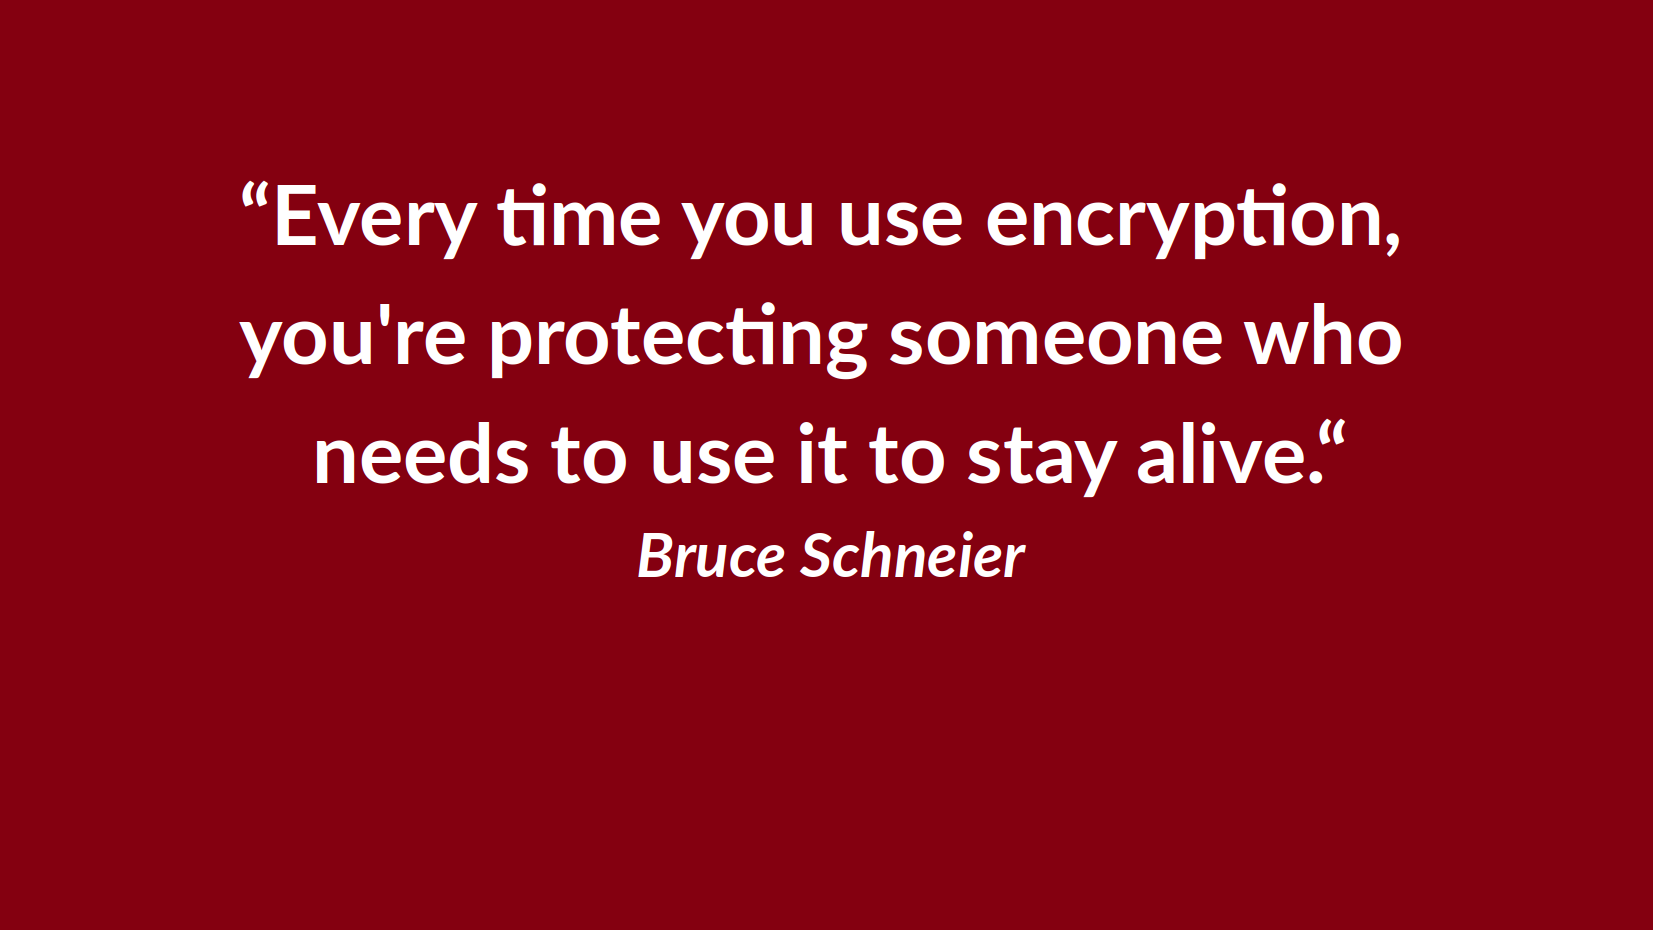 Going dark can be a good thing: Whenever you use encryption, you are protecting someone who needs it to stay alice. - Bruce Schneier